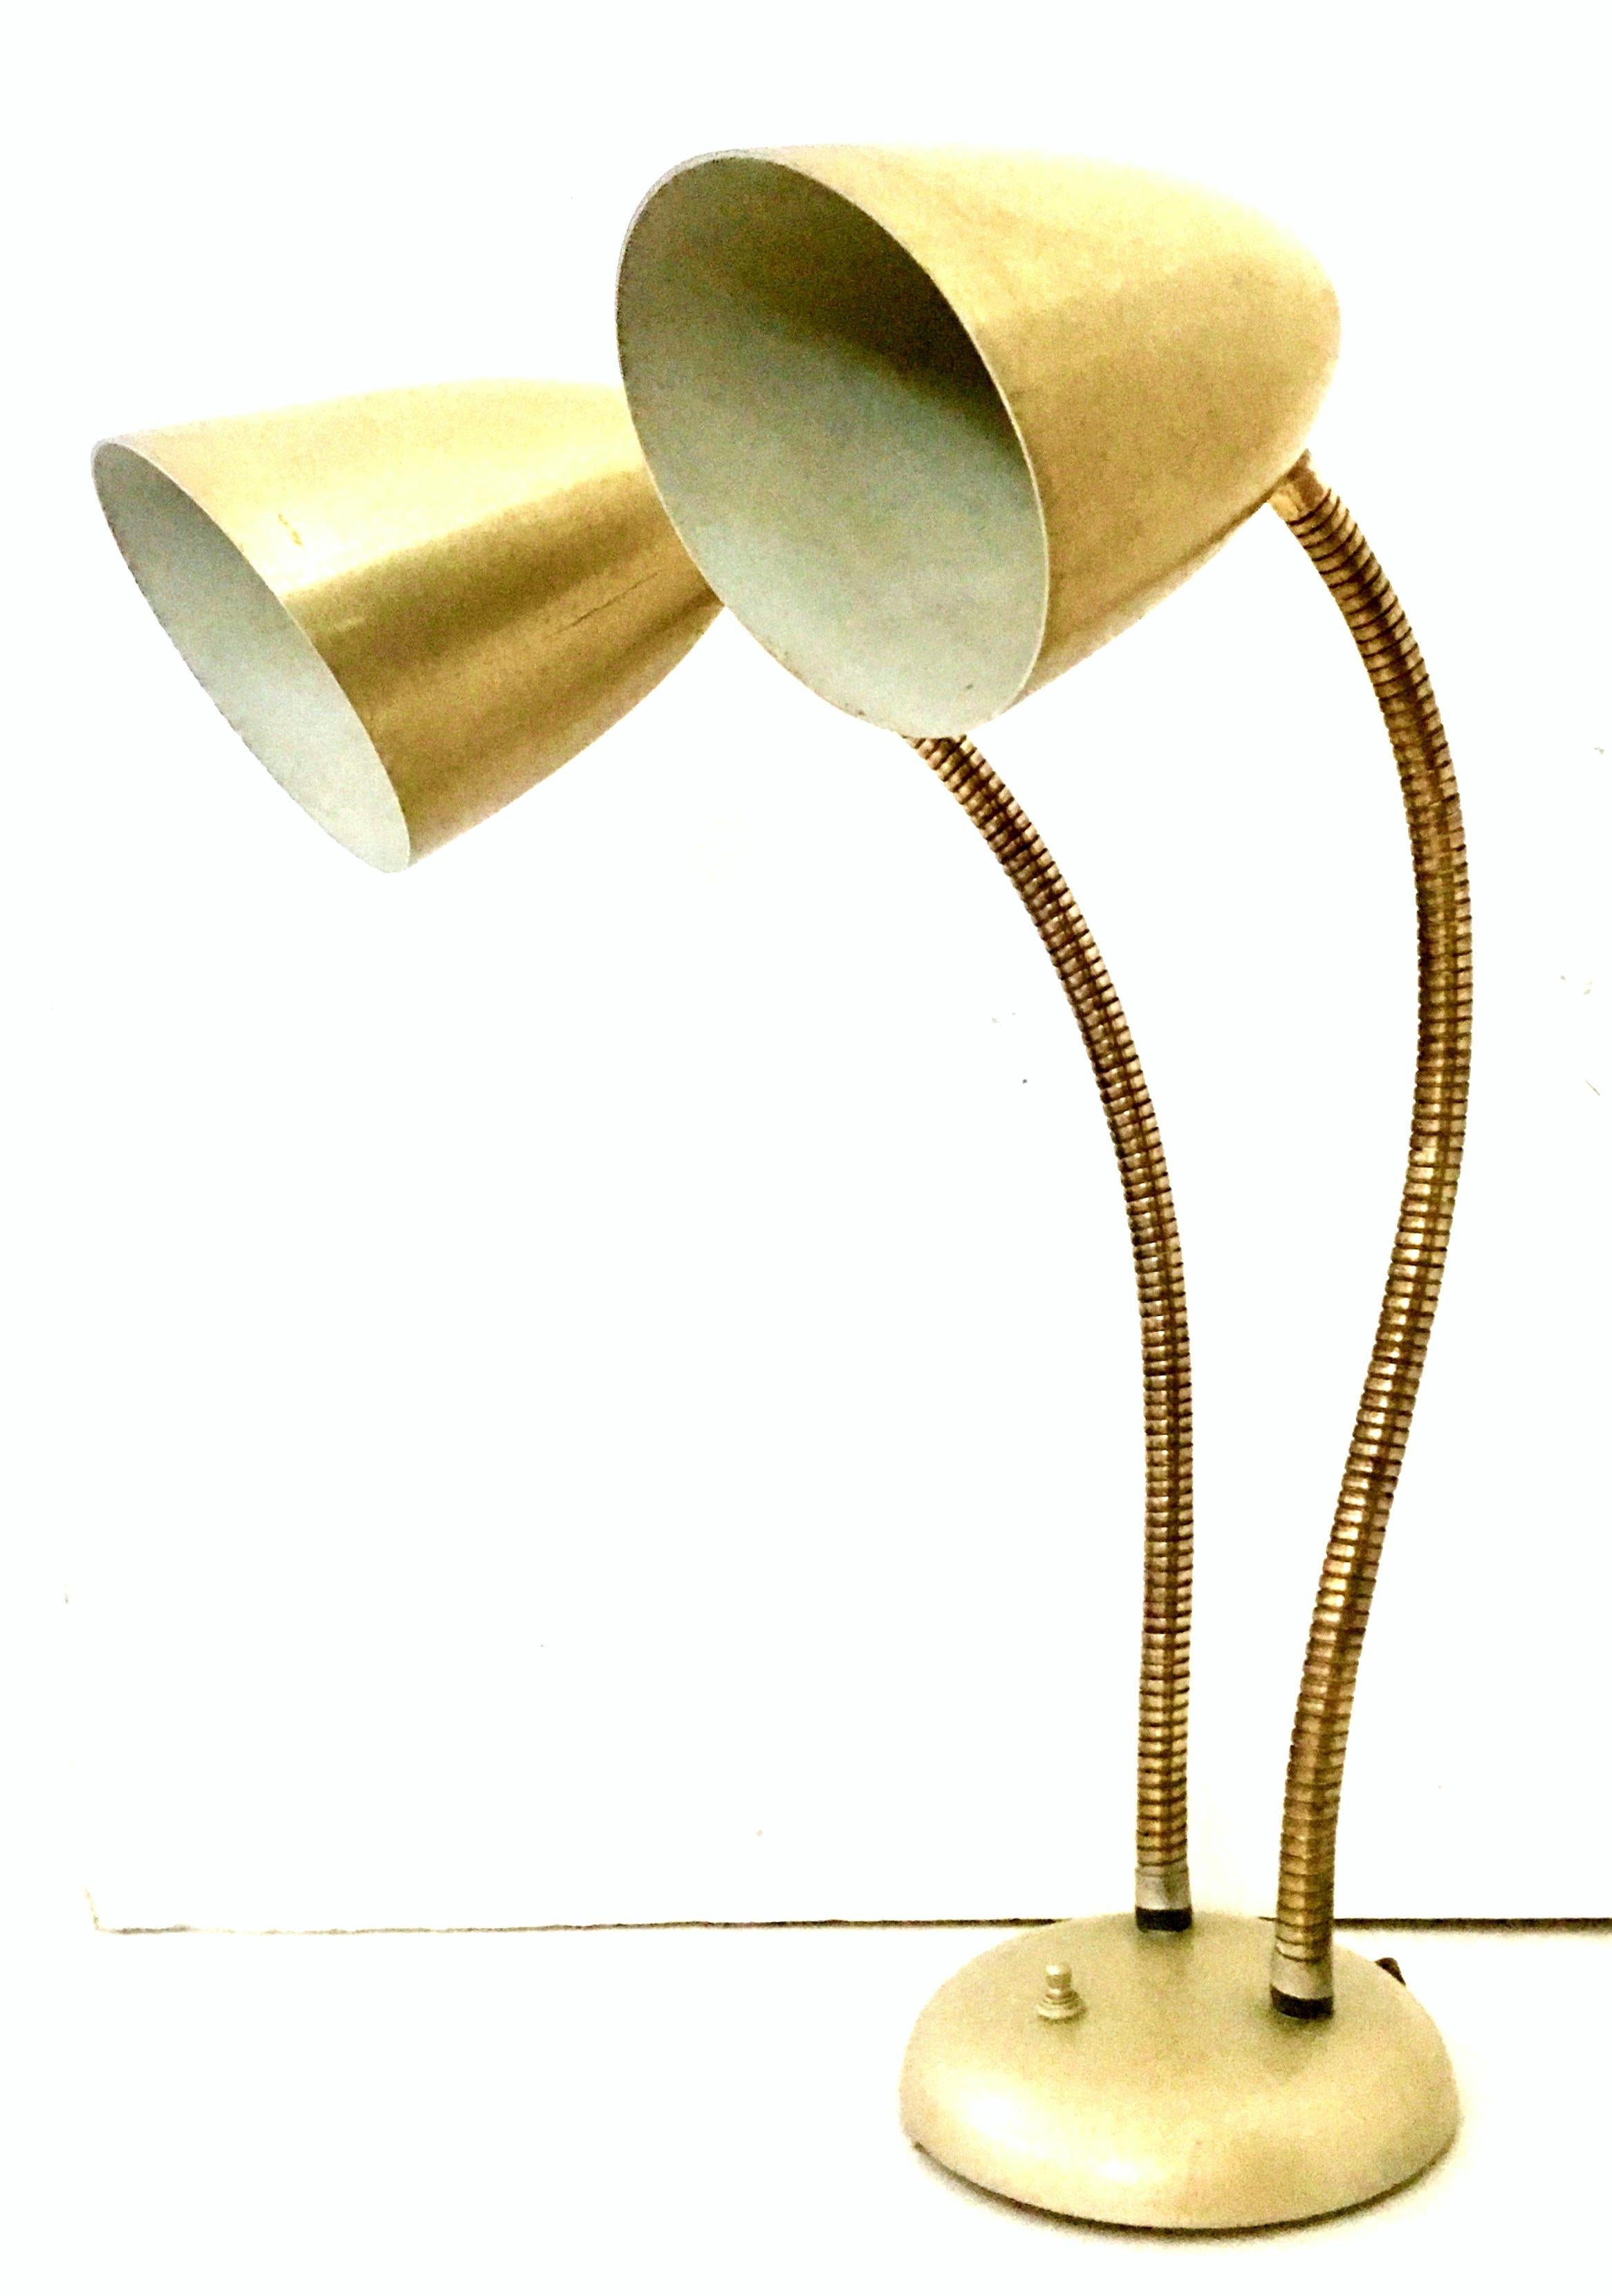 1950'S Gold metal enamel double cone shade goose neck lamp by Prescolite-USA. This double cone shade metal and brass gold goose neck lamp features 360 degree pivoting brass coil arms, a three way switch at the base and accommodates standard three